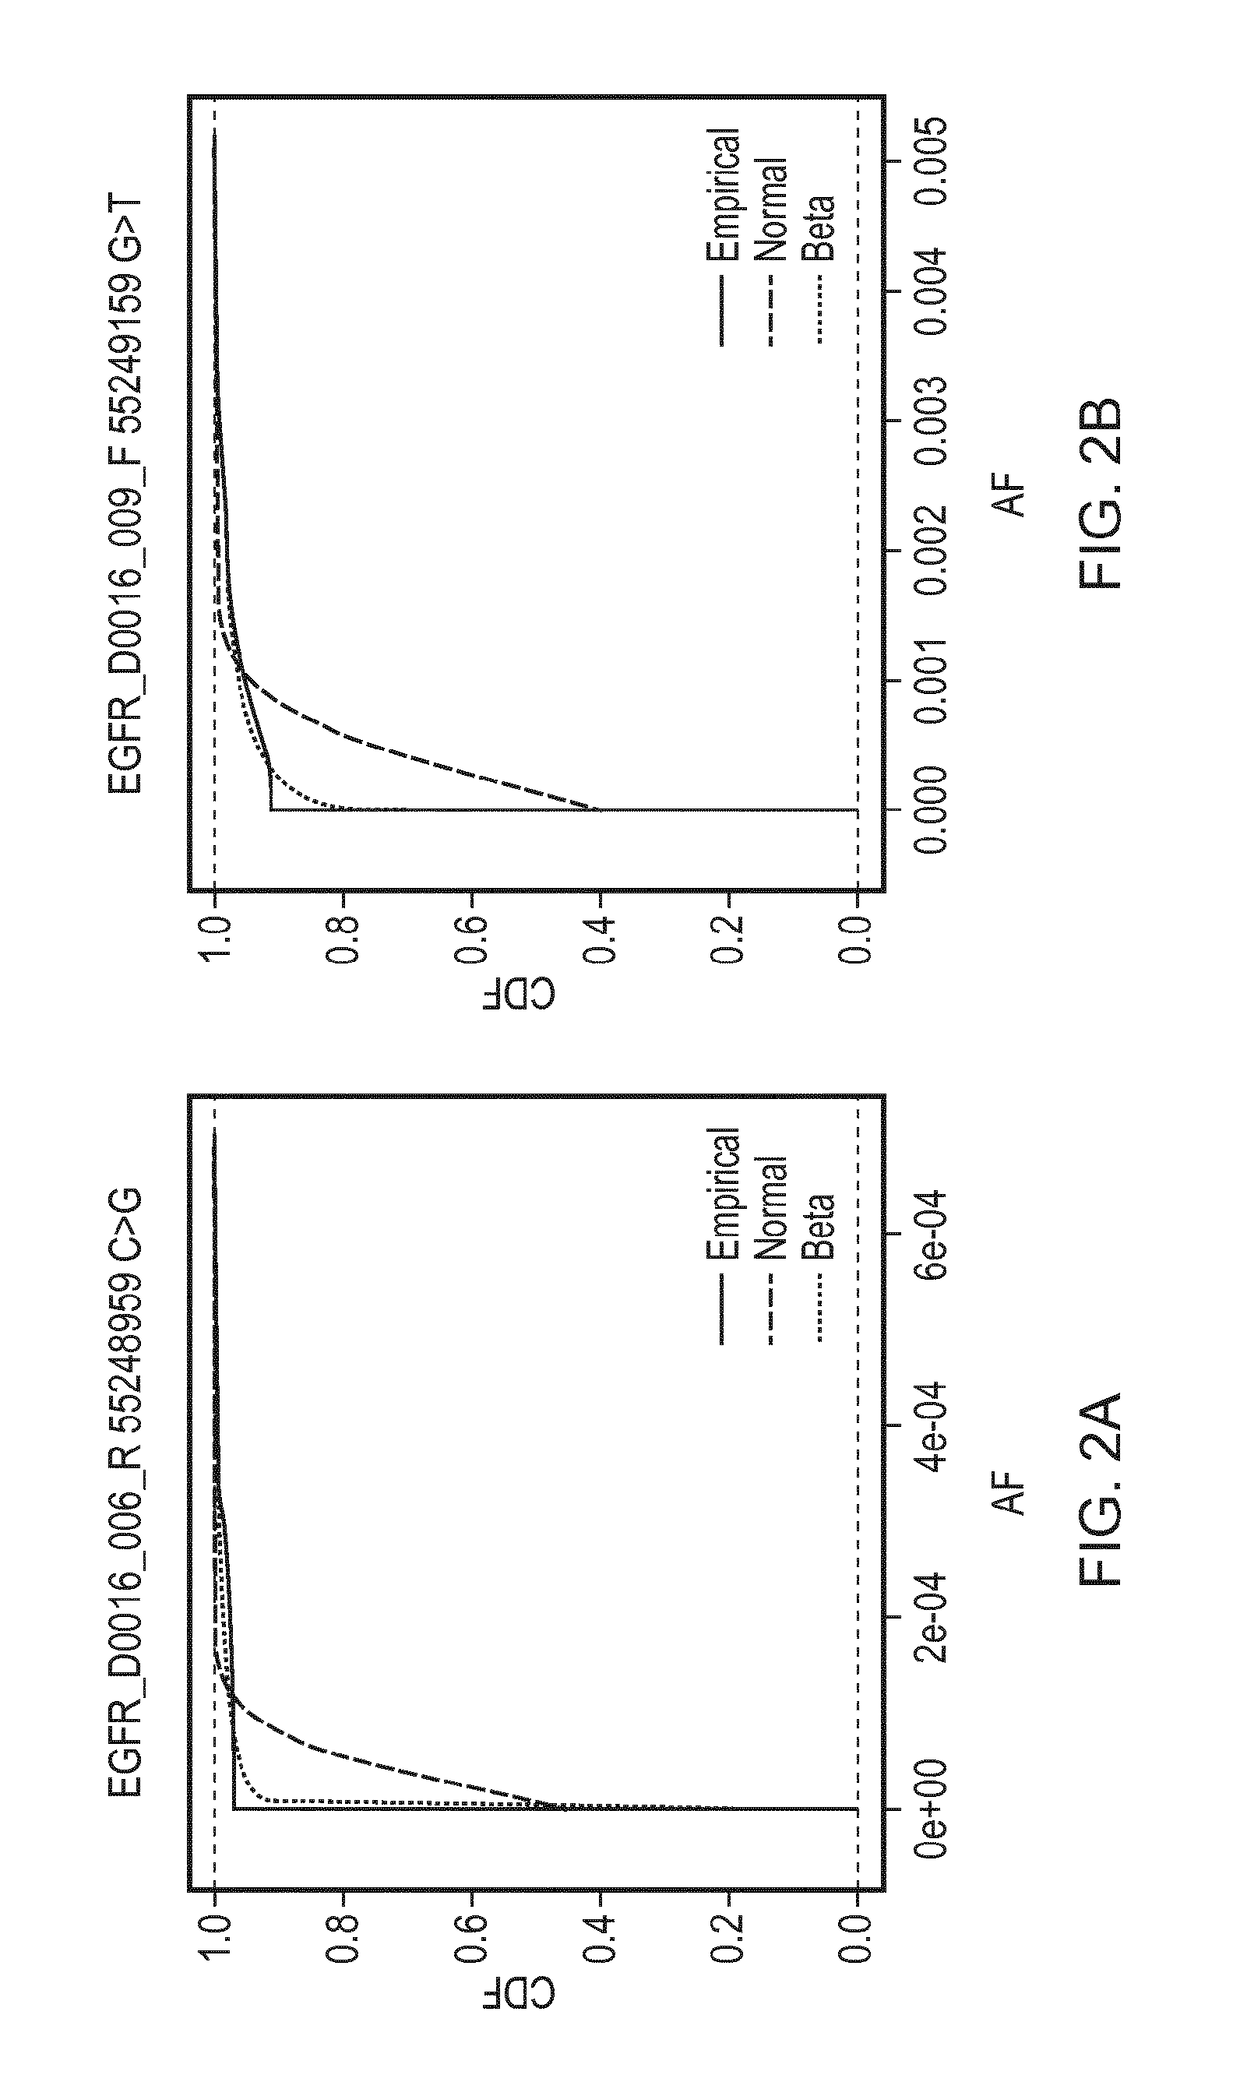 Method for Detecting a Genetic Variant